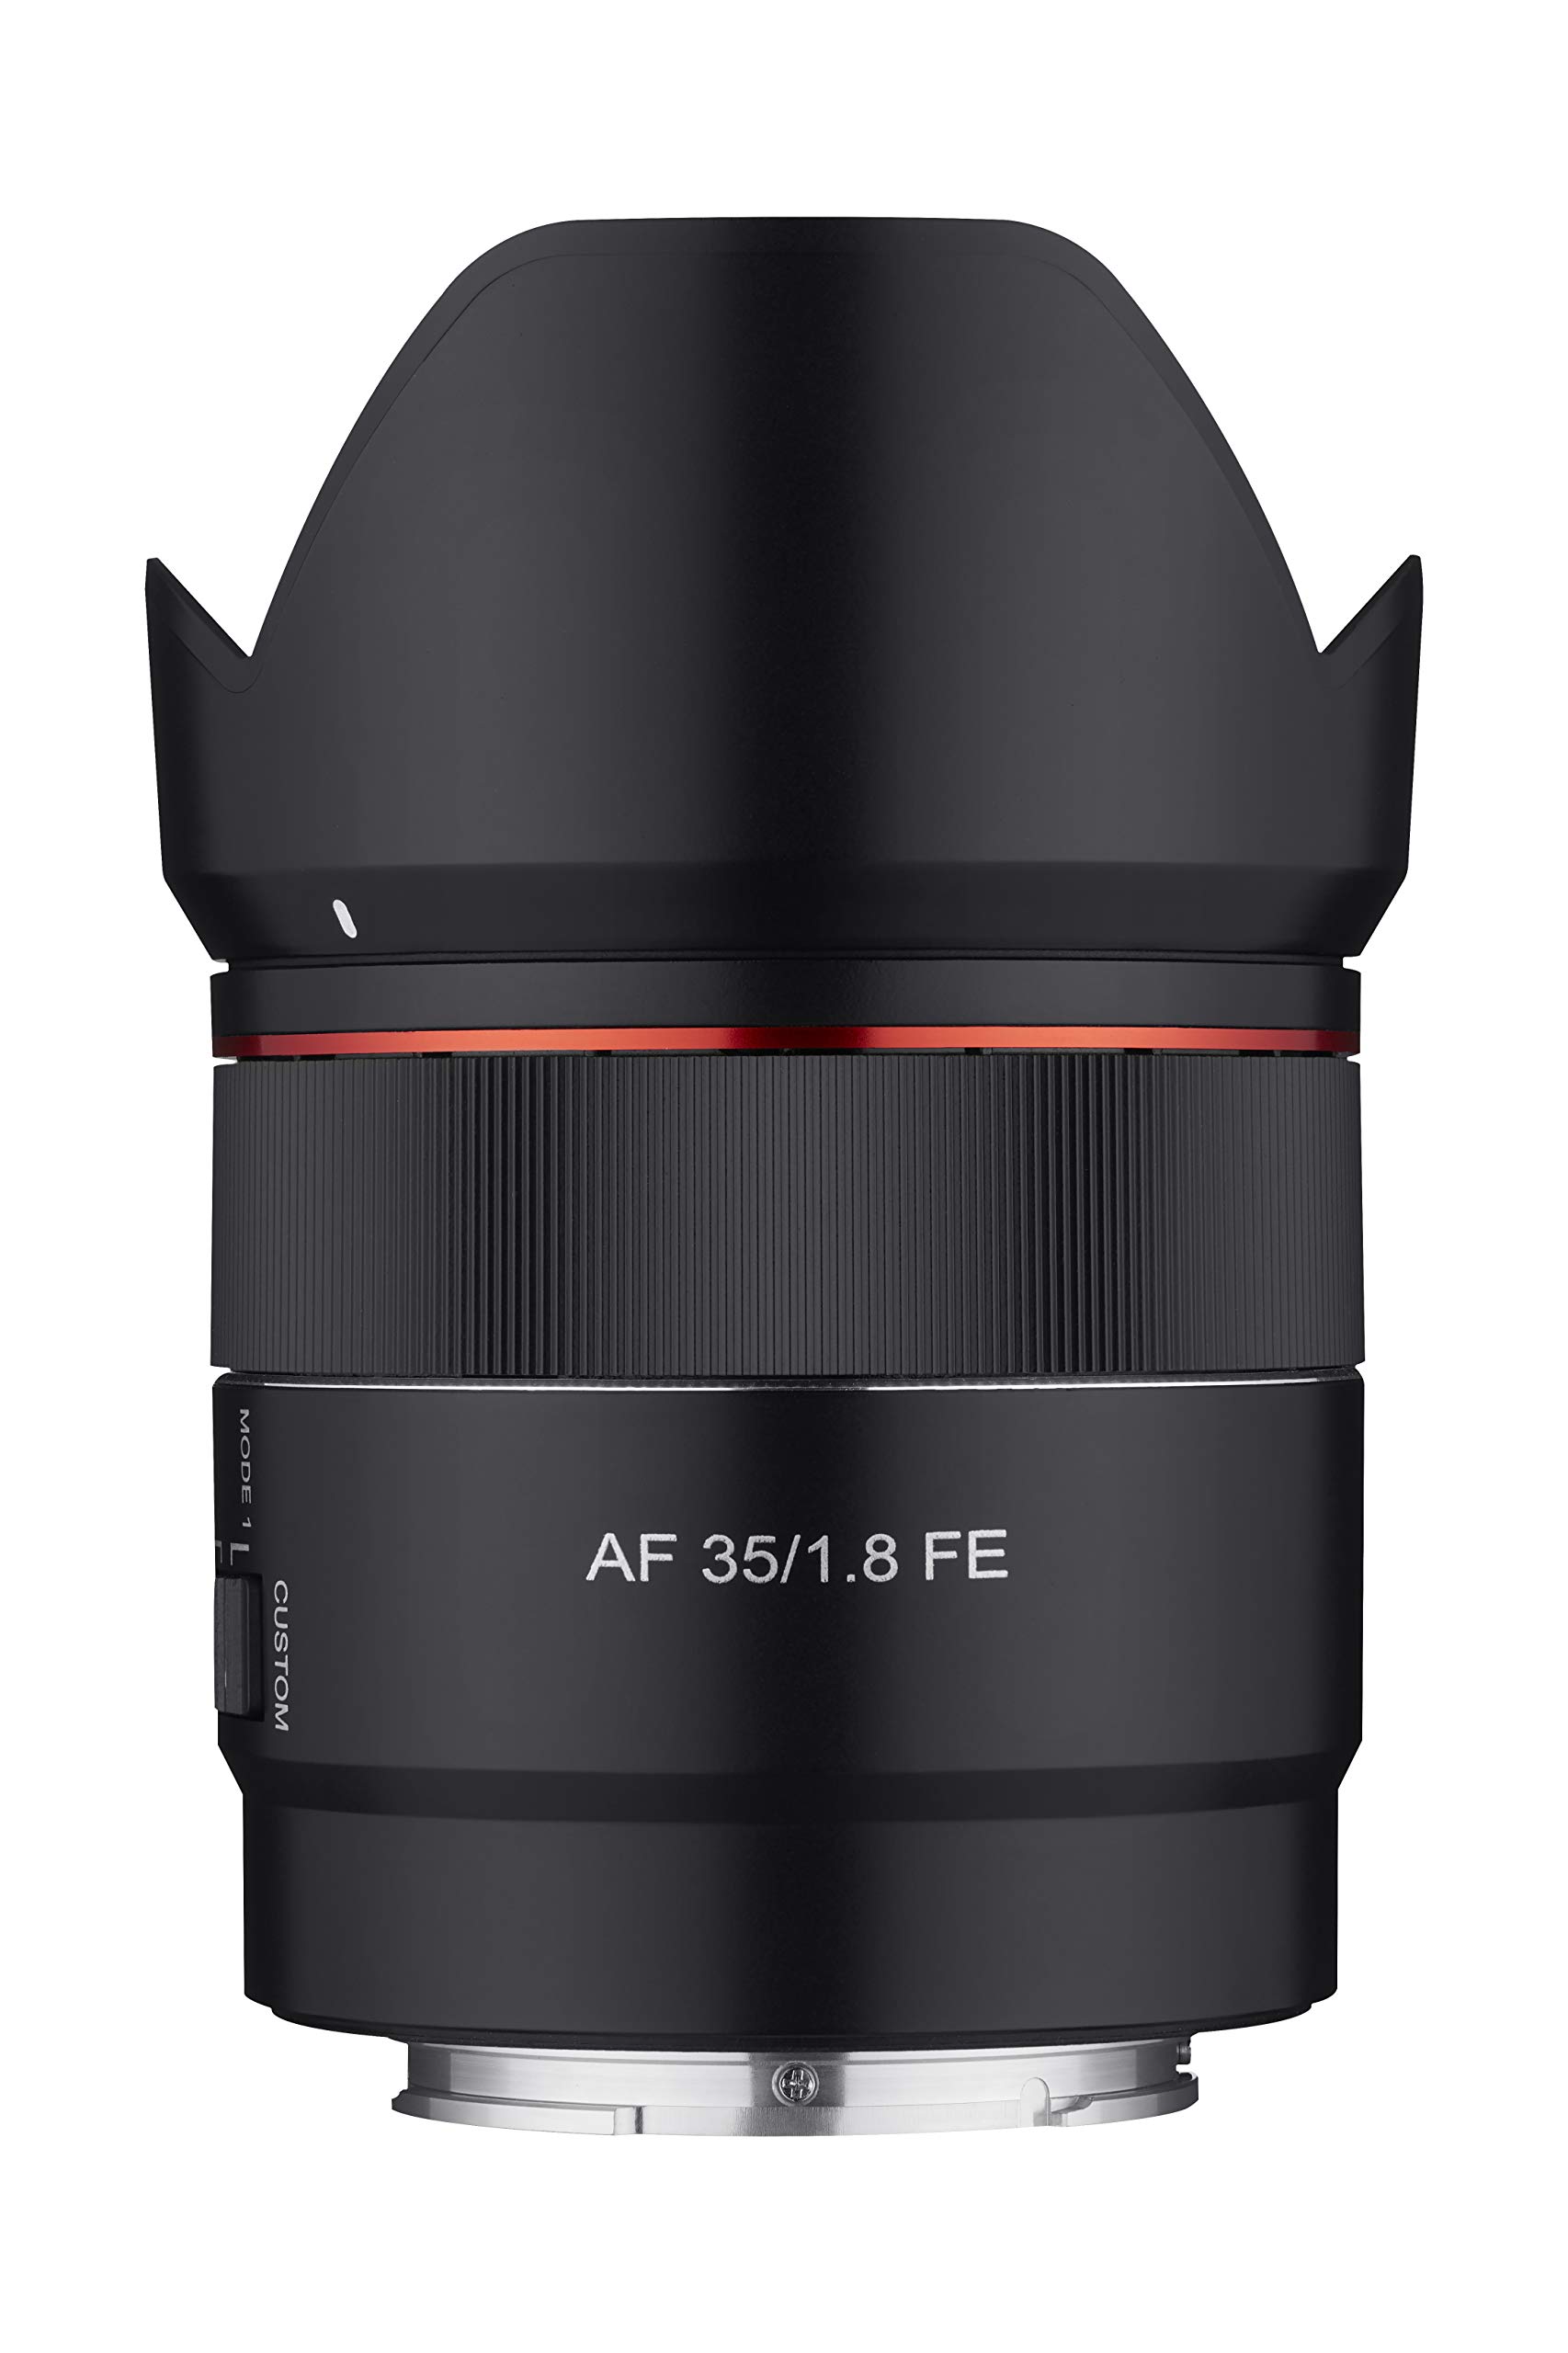 Deal of the day for Prime Members: Rokinon 35mm F1.8 Auto Focus  - $209